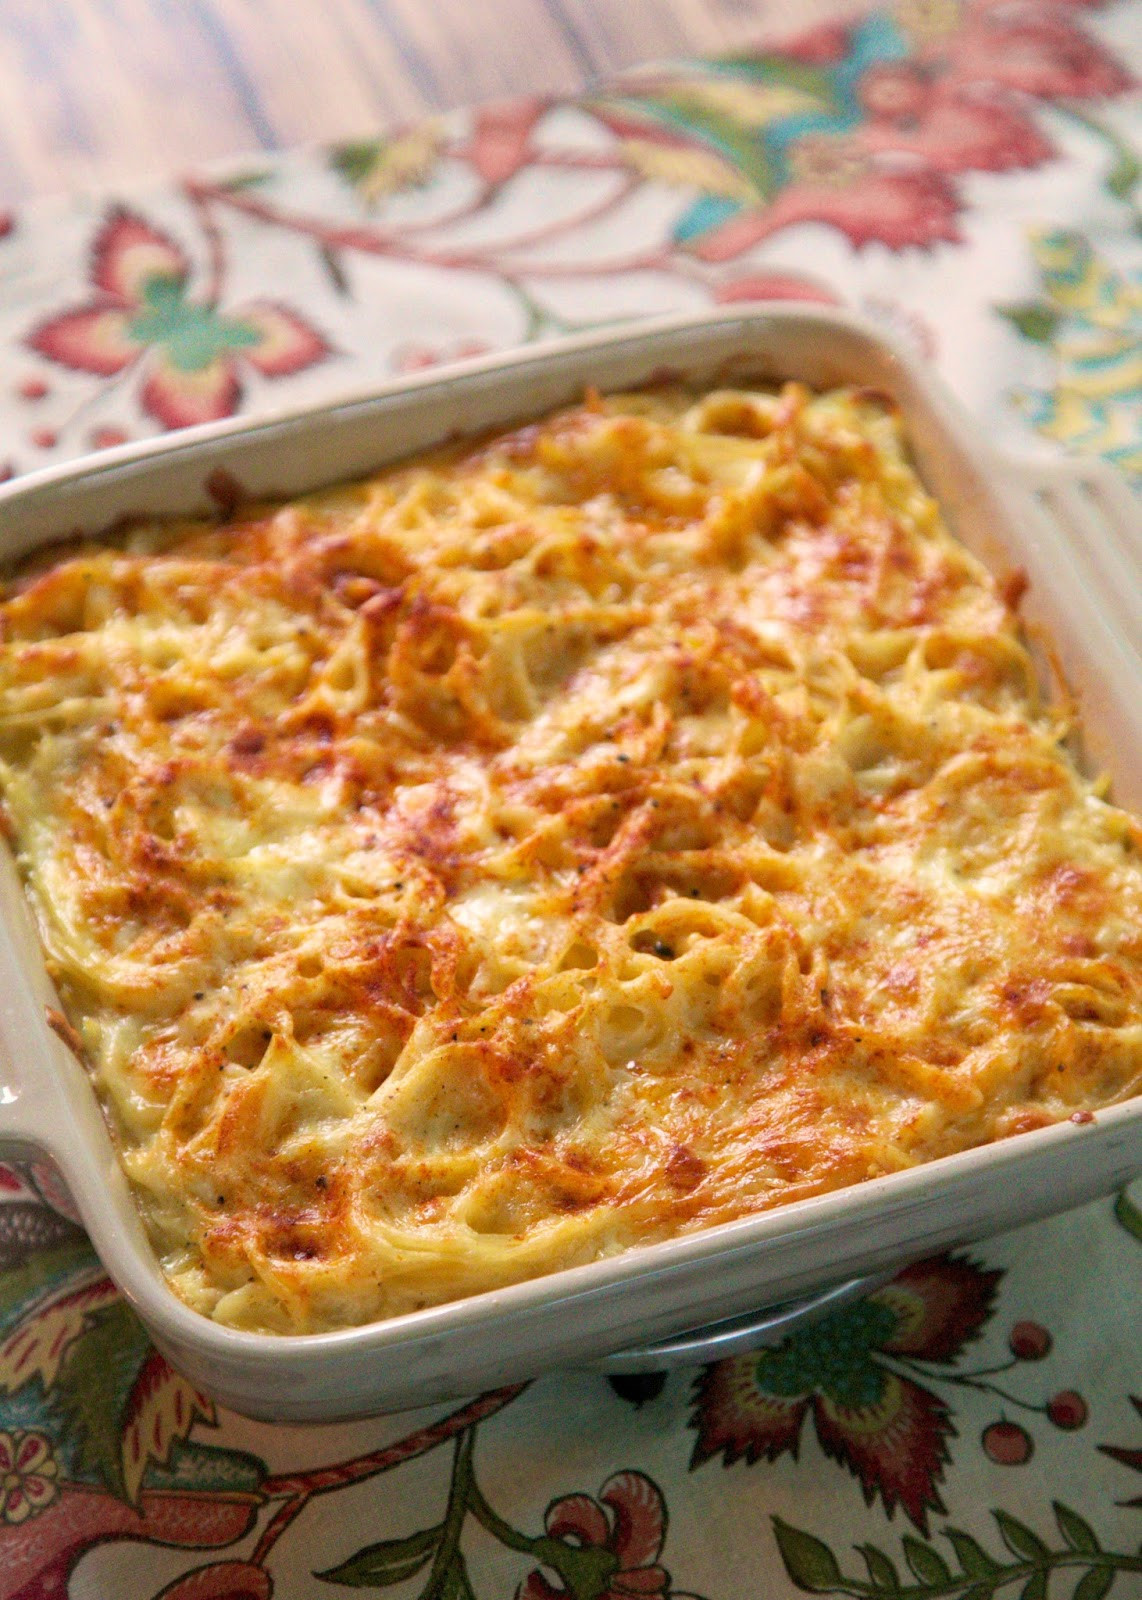 Baked Macaroni And Cheese With Spaghetti Noodles
 Baked Spaghetti & Cheese